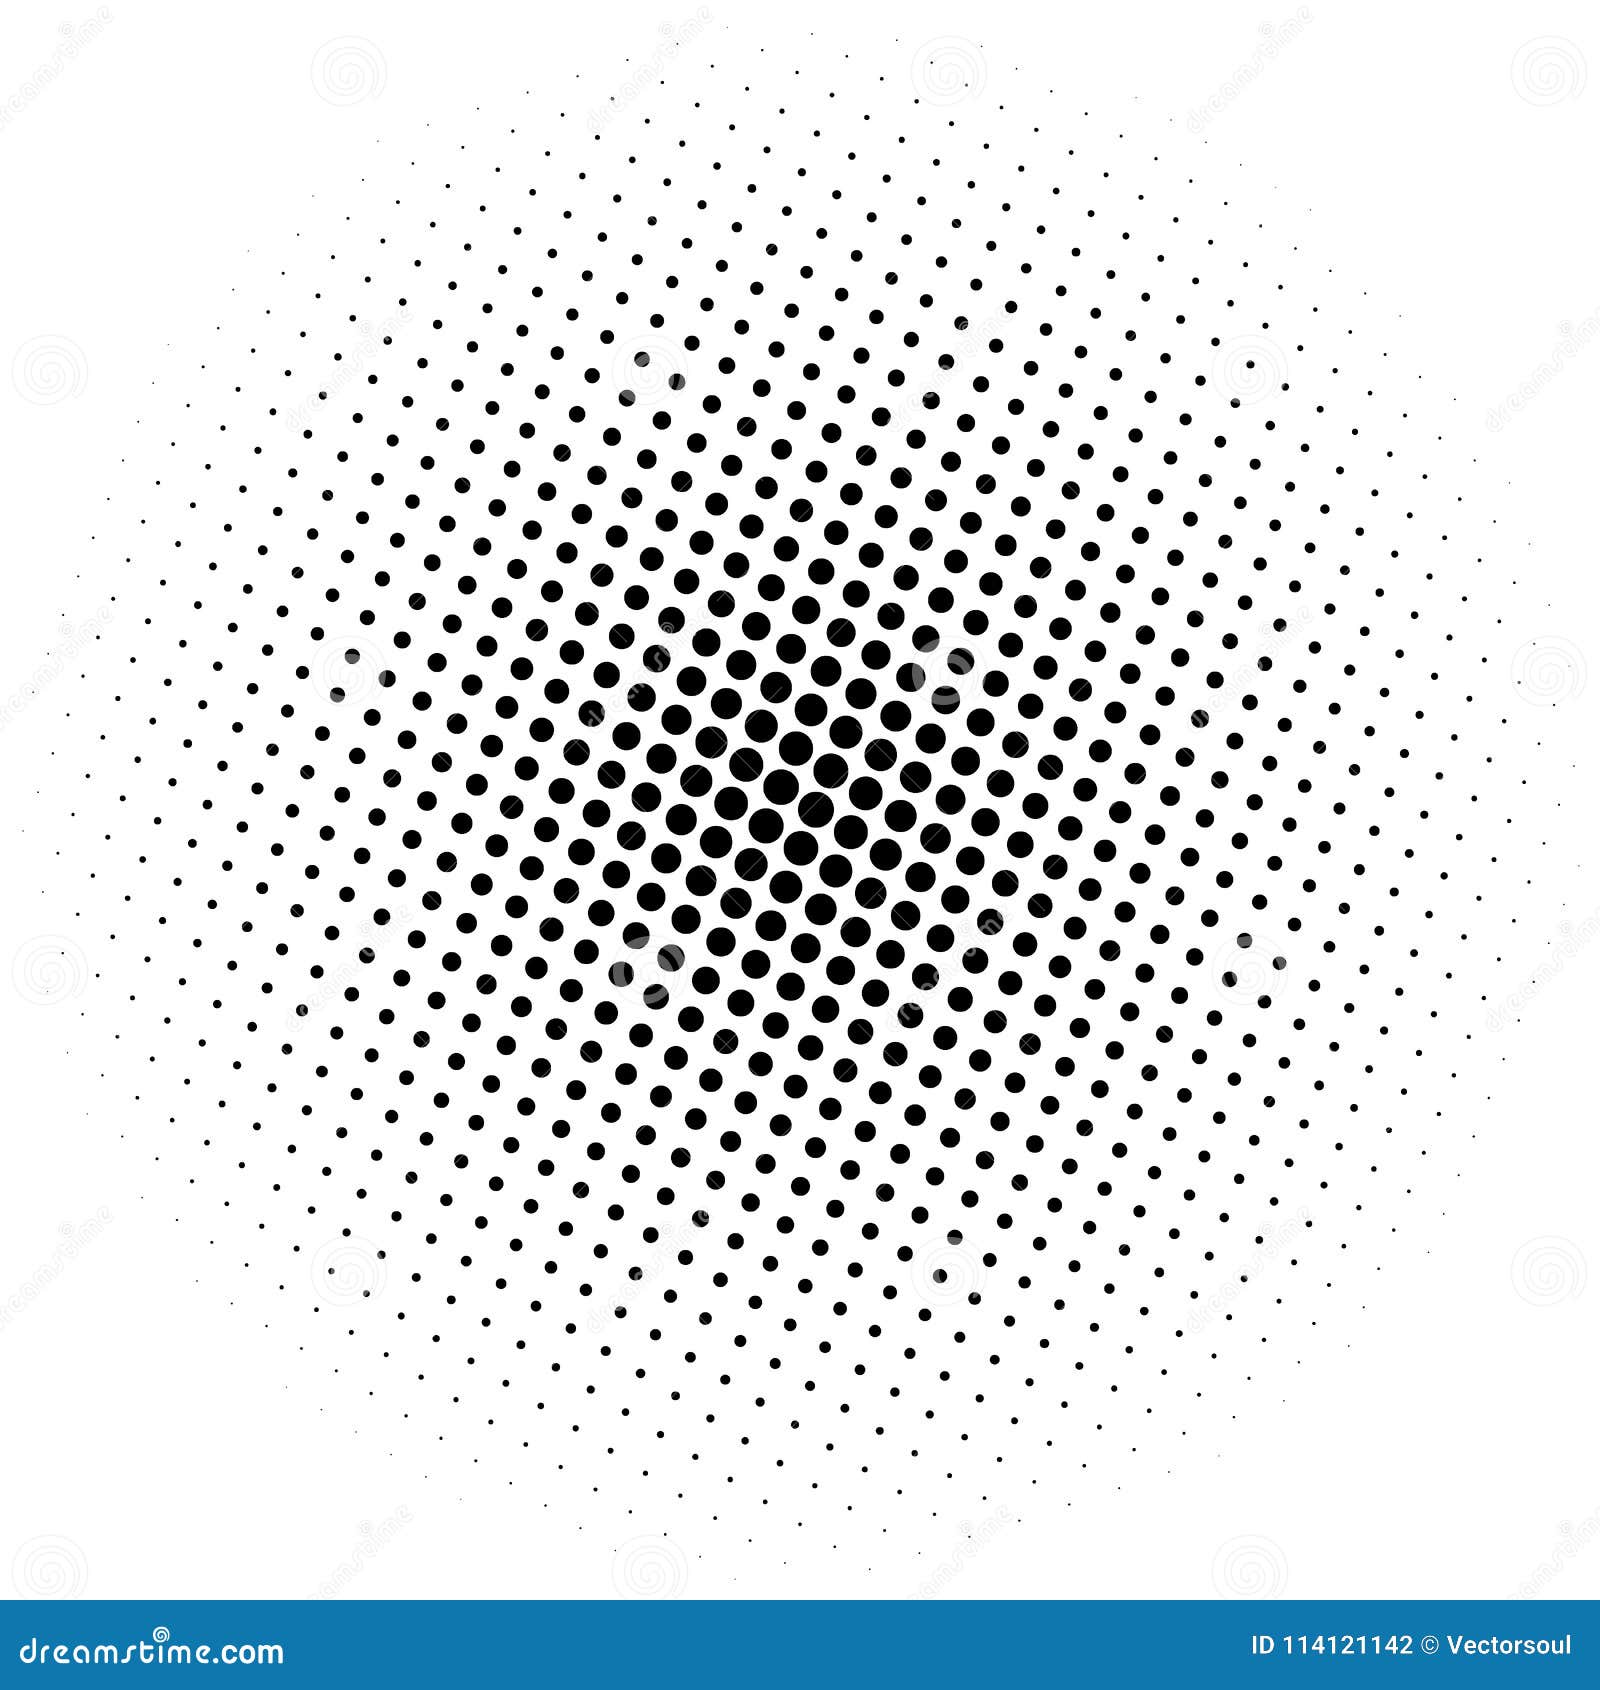 halftone . abstract geometric graphic with half-tone pattern